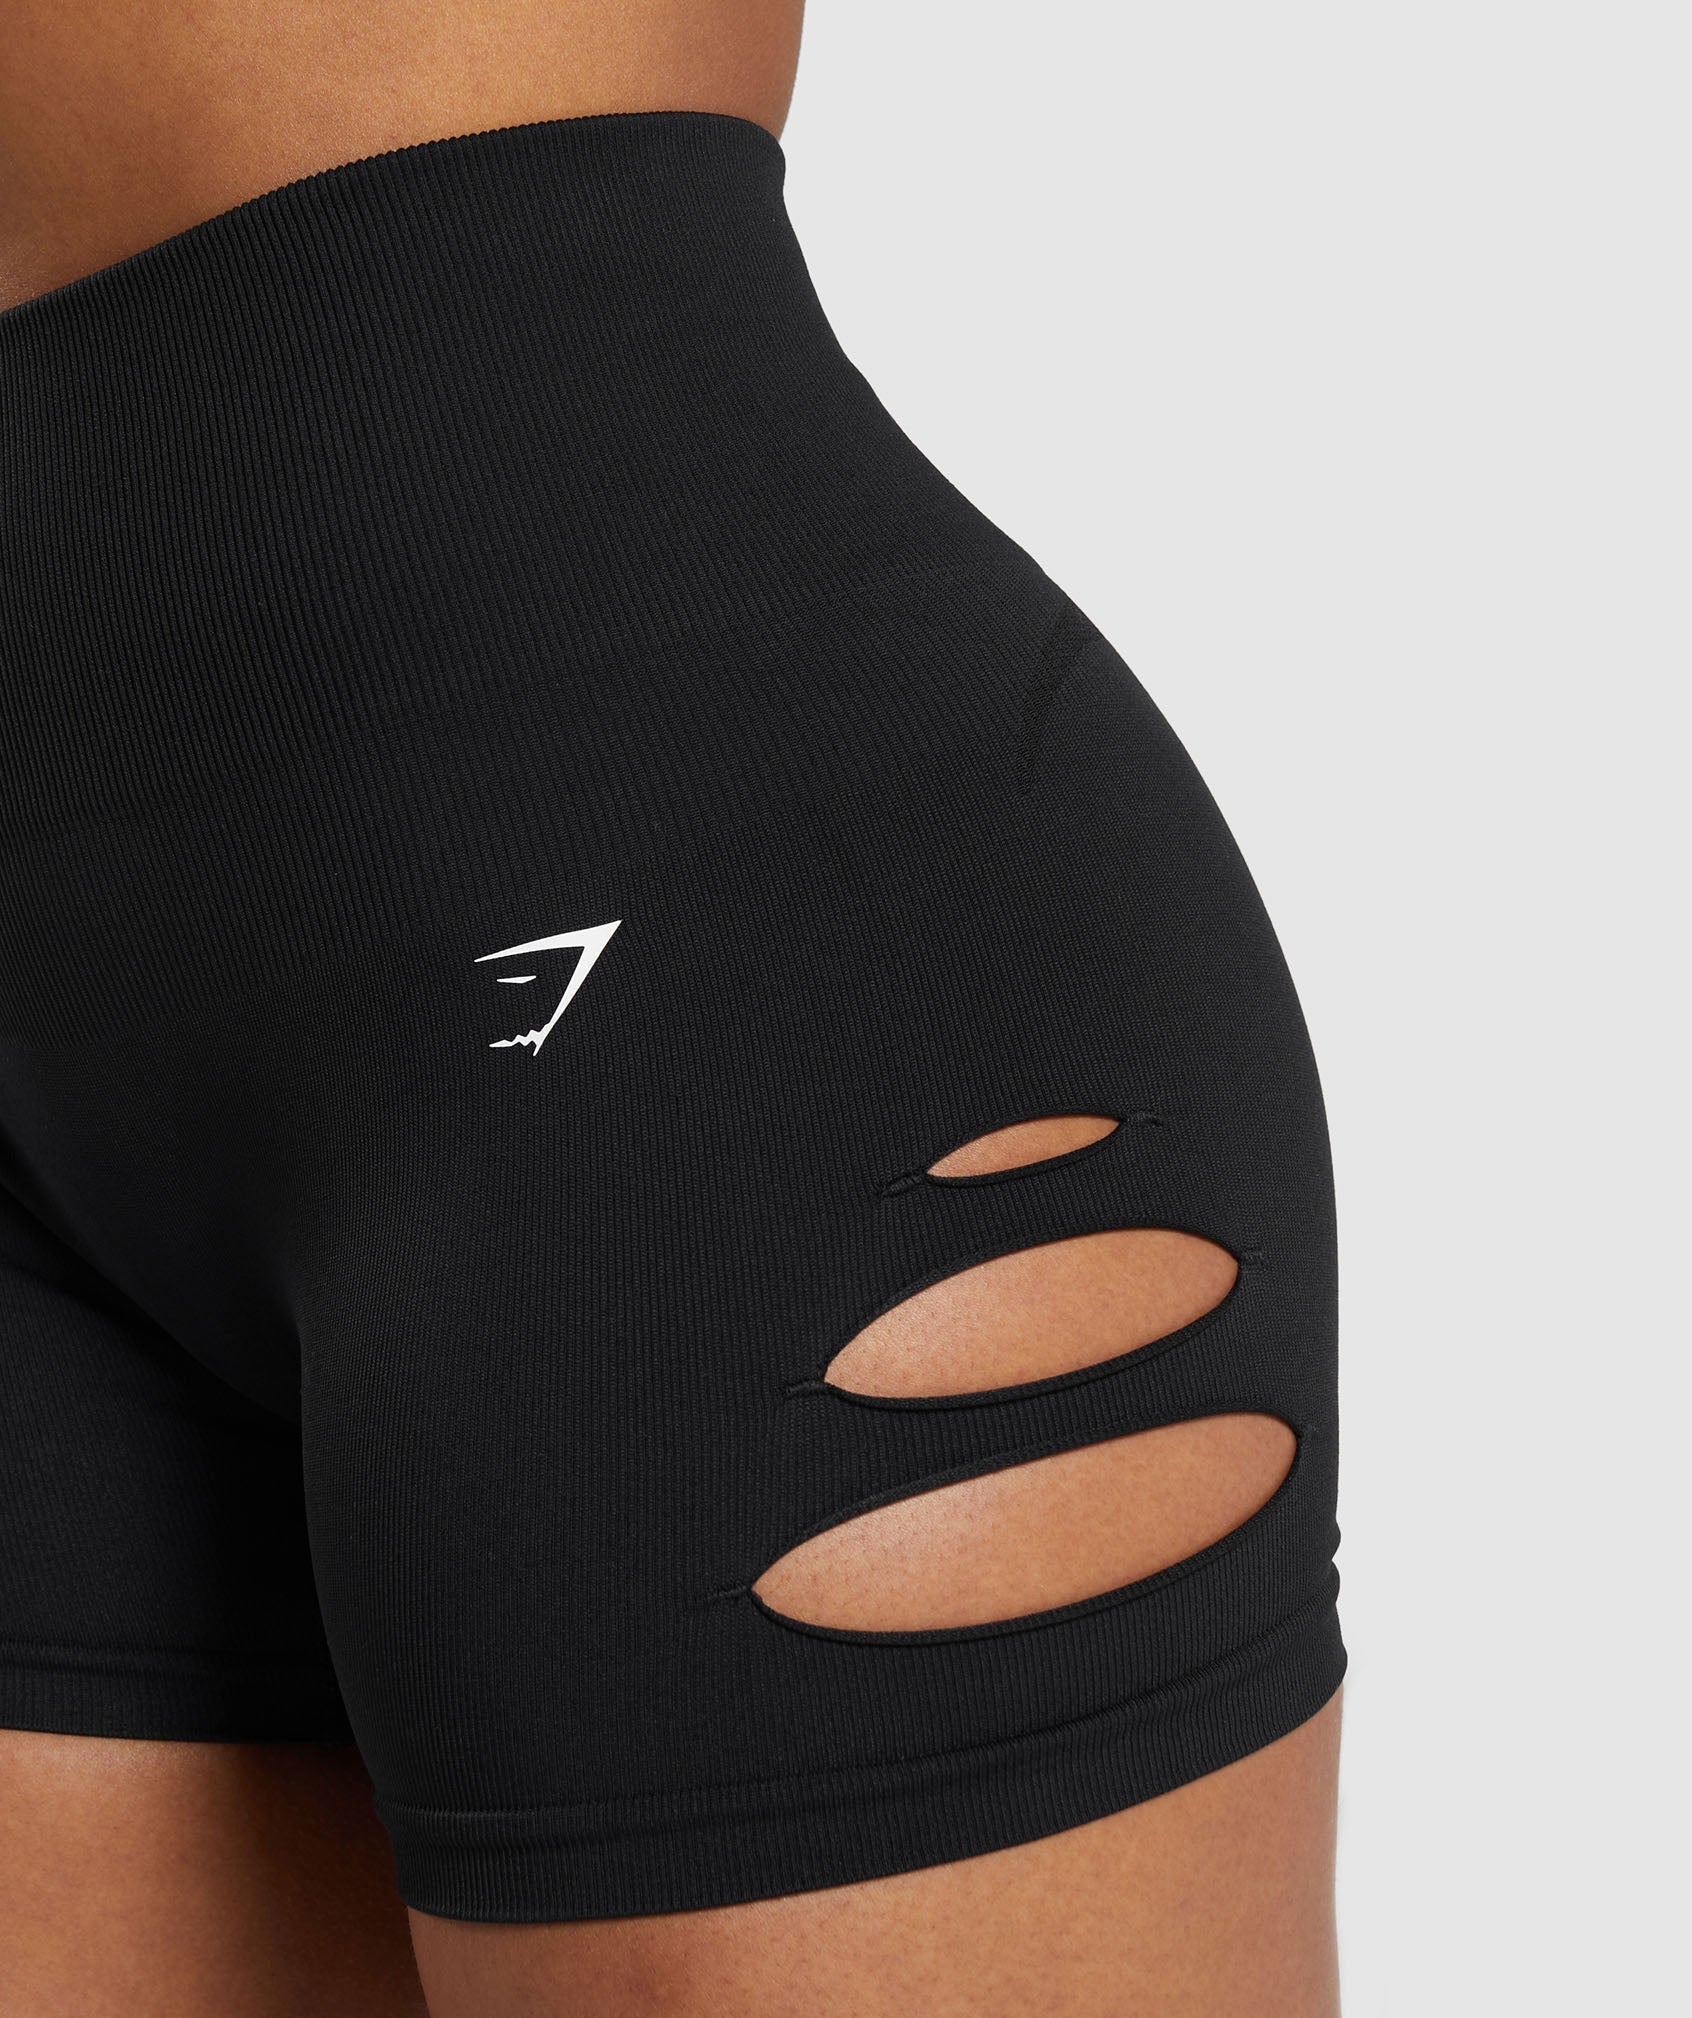 Gains Seamless Ripped Shorts in Black - view 6